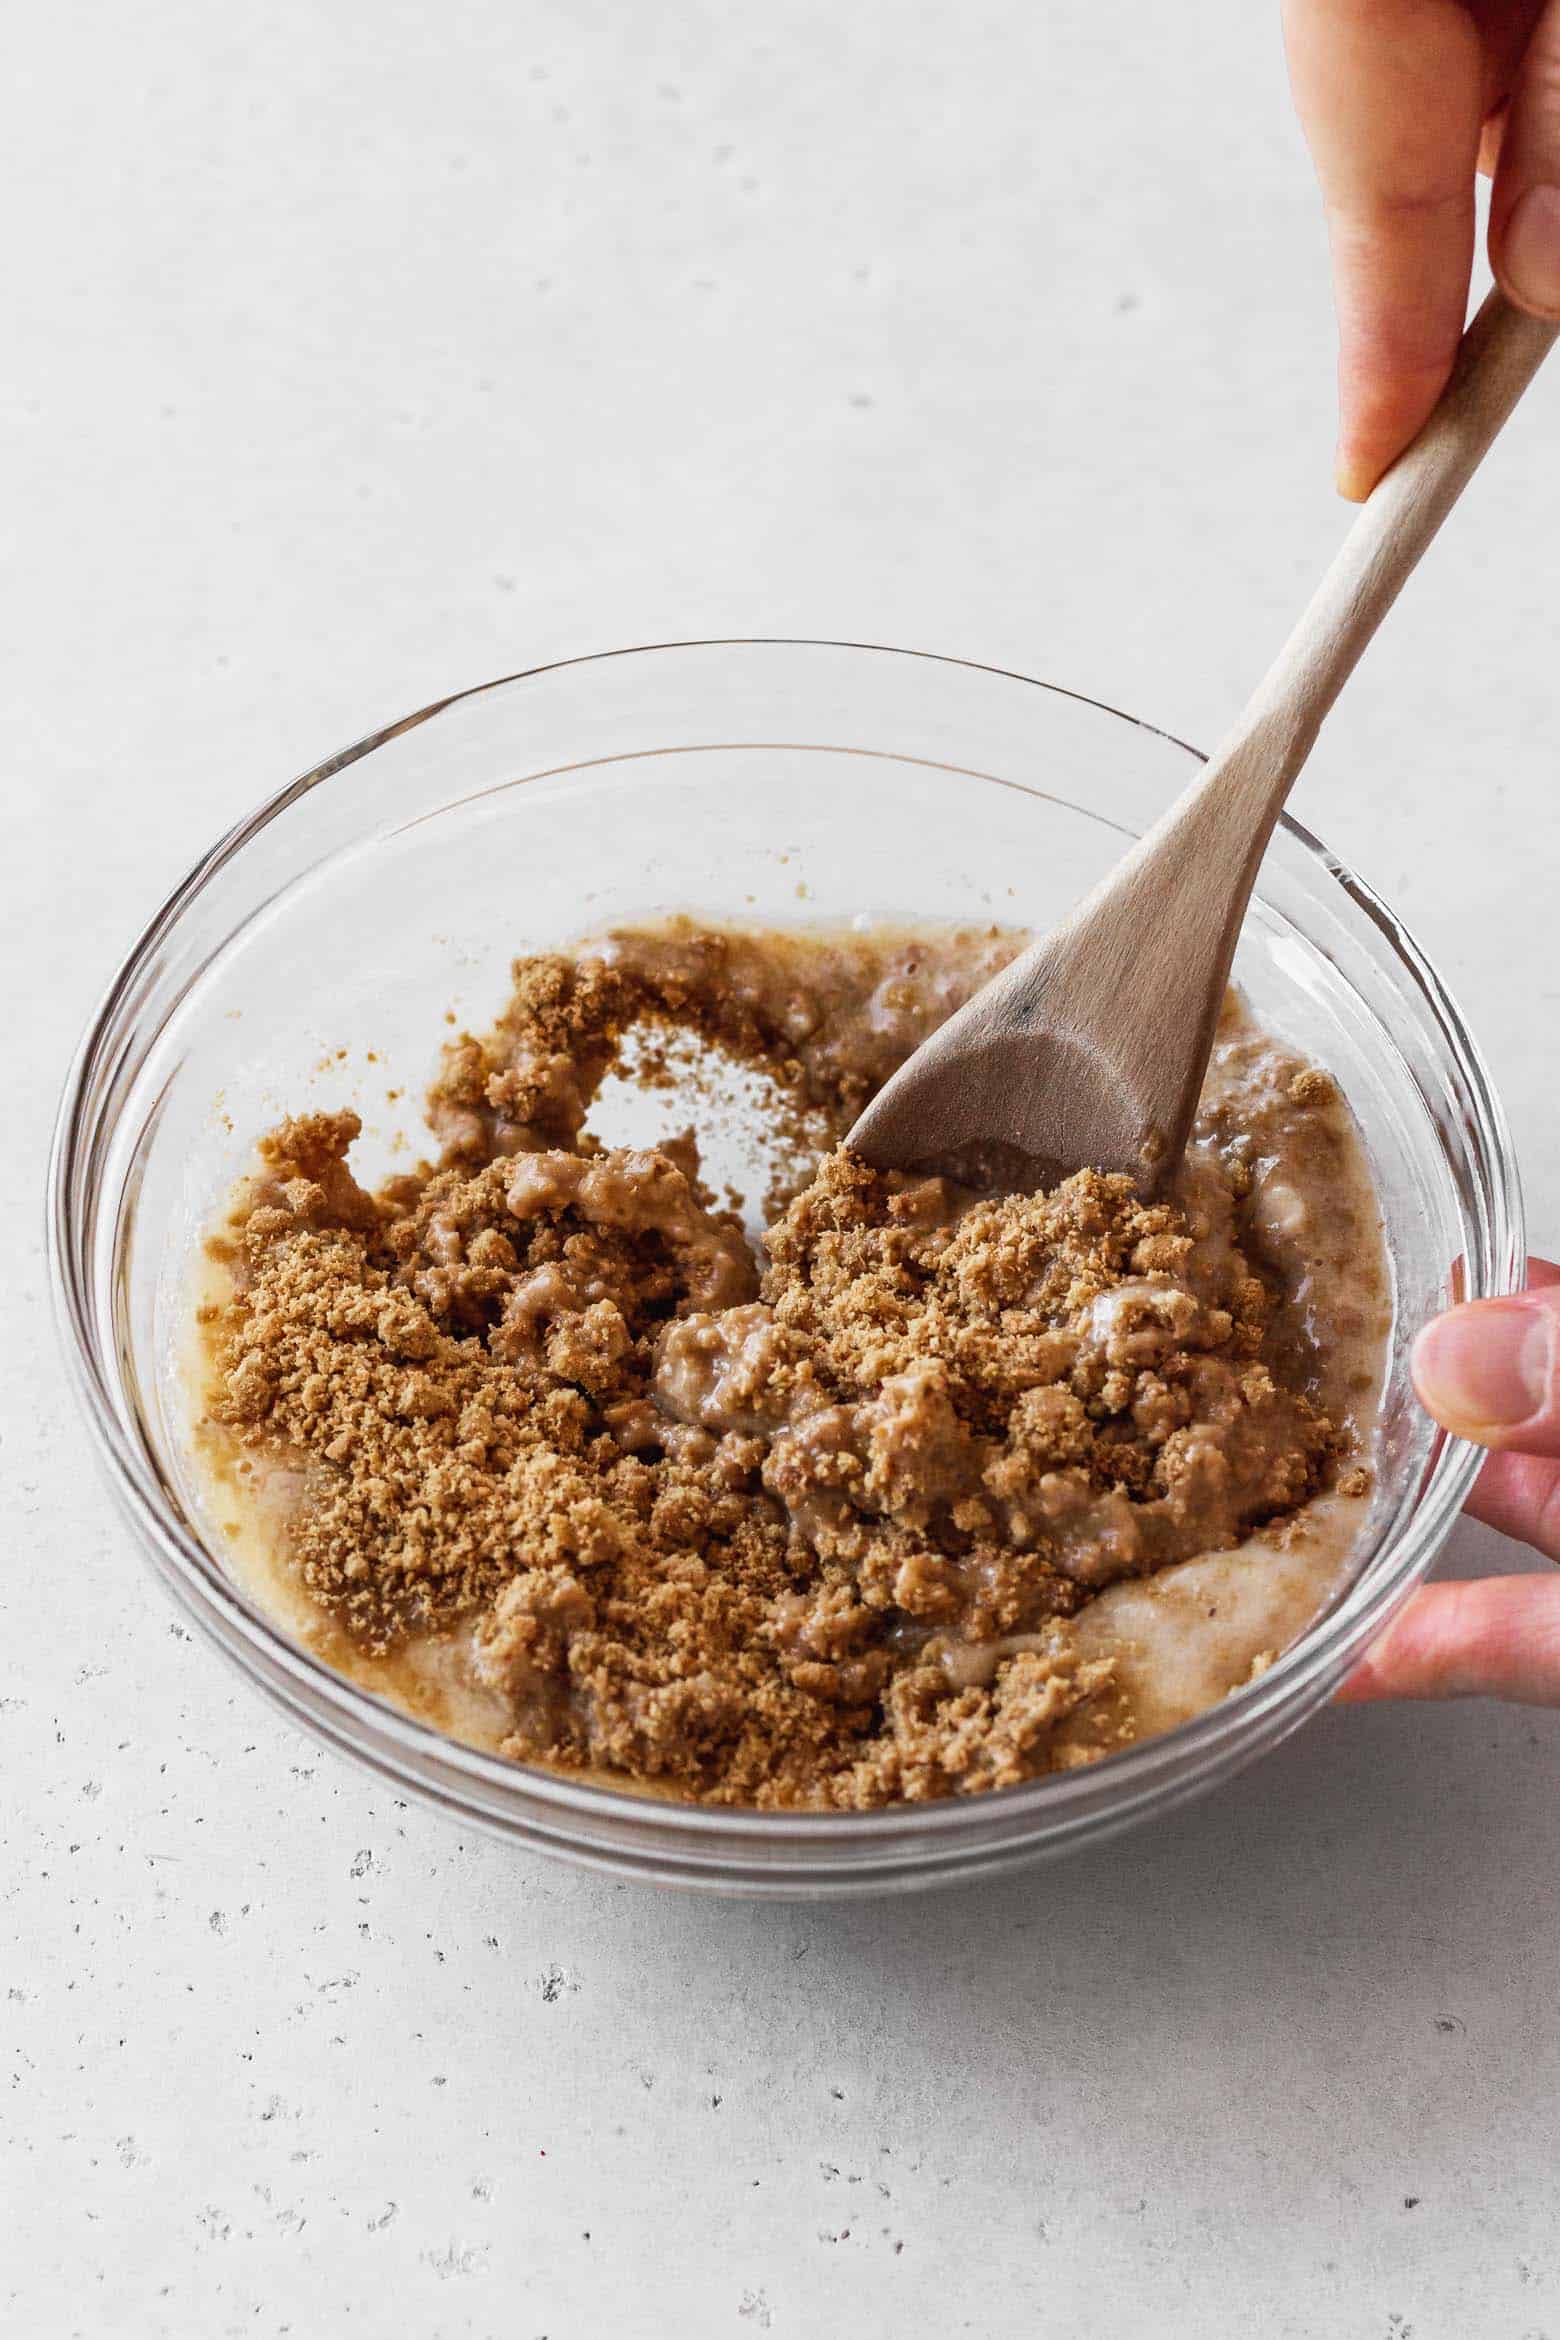 Mixing the graham cracker crumbs and butter with a wooden spoon.